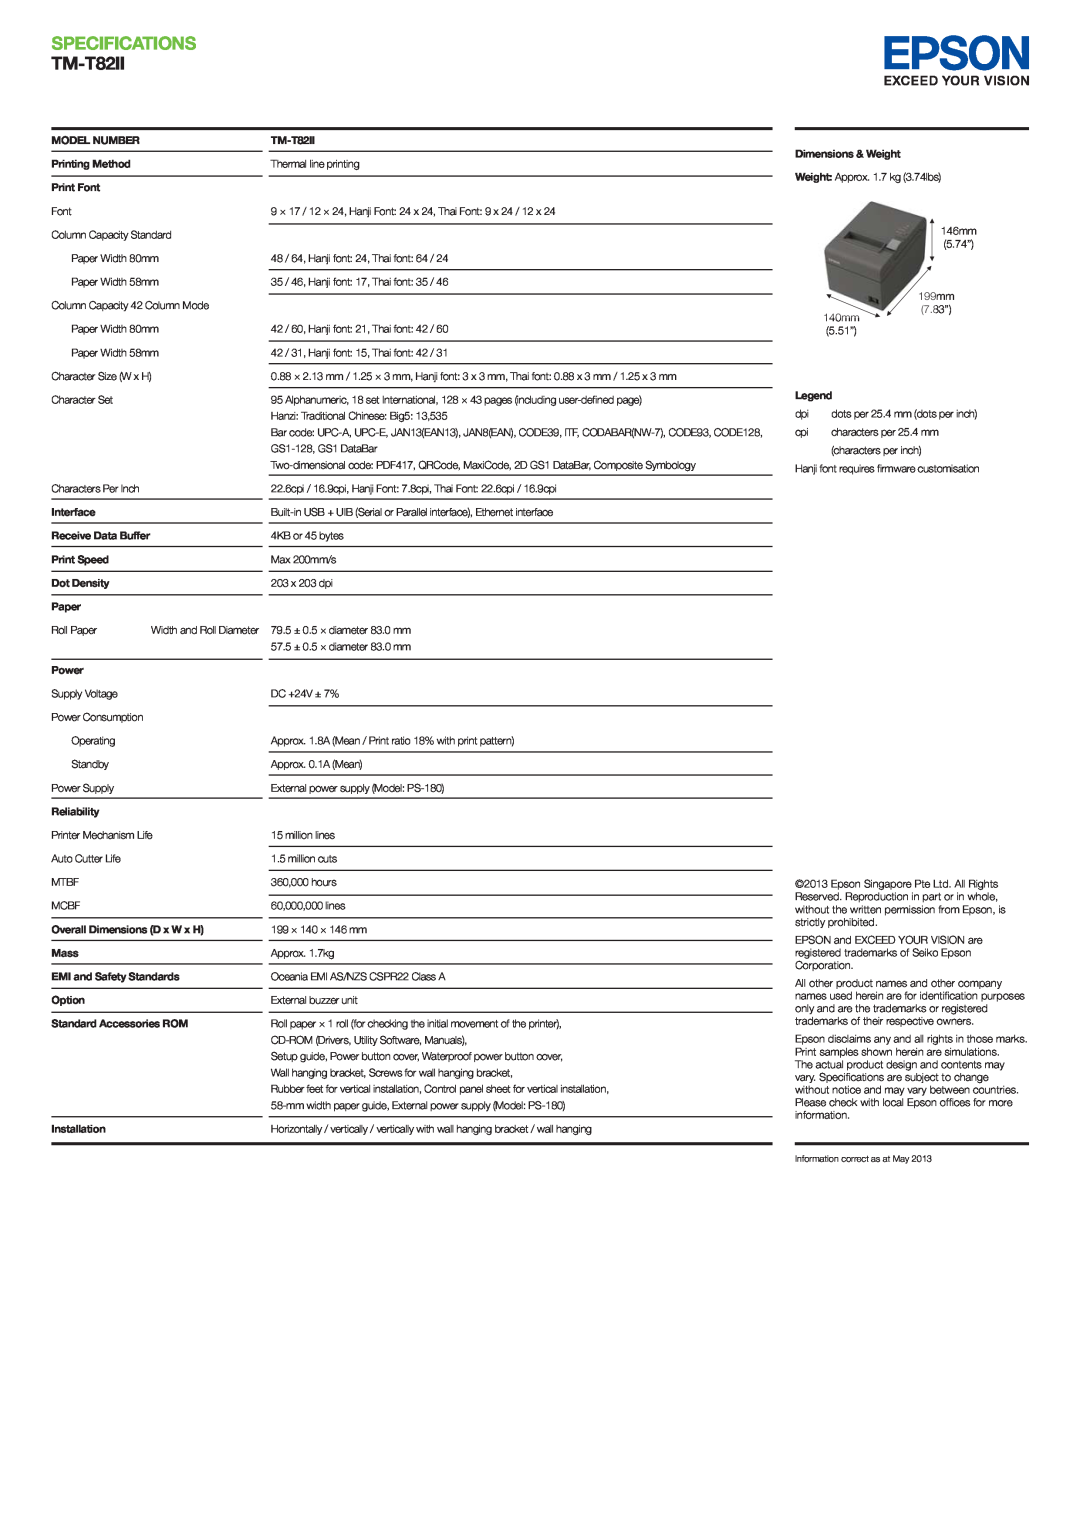 Epson manual SPECIFICATIONS TM-T82II 